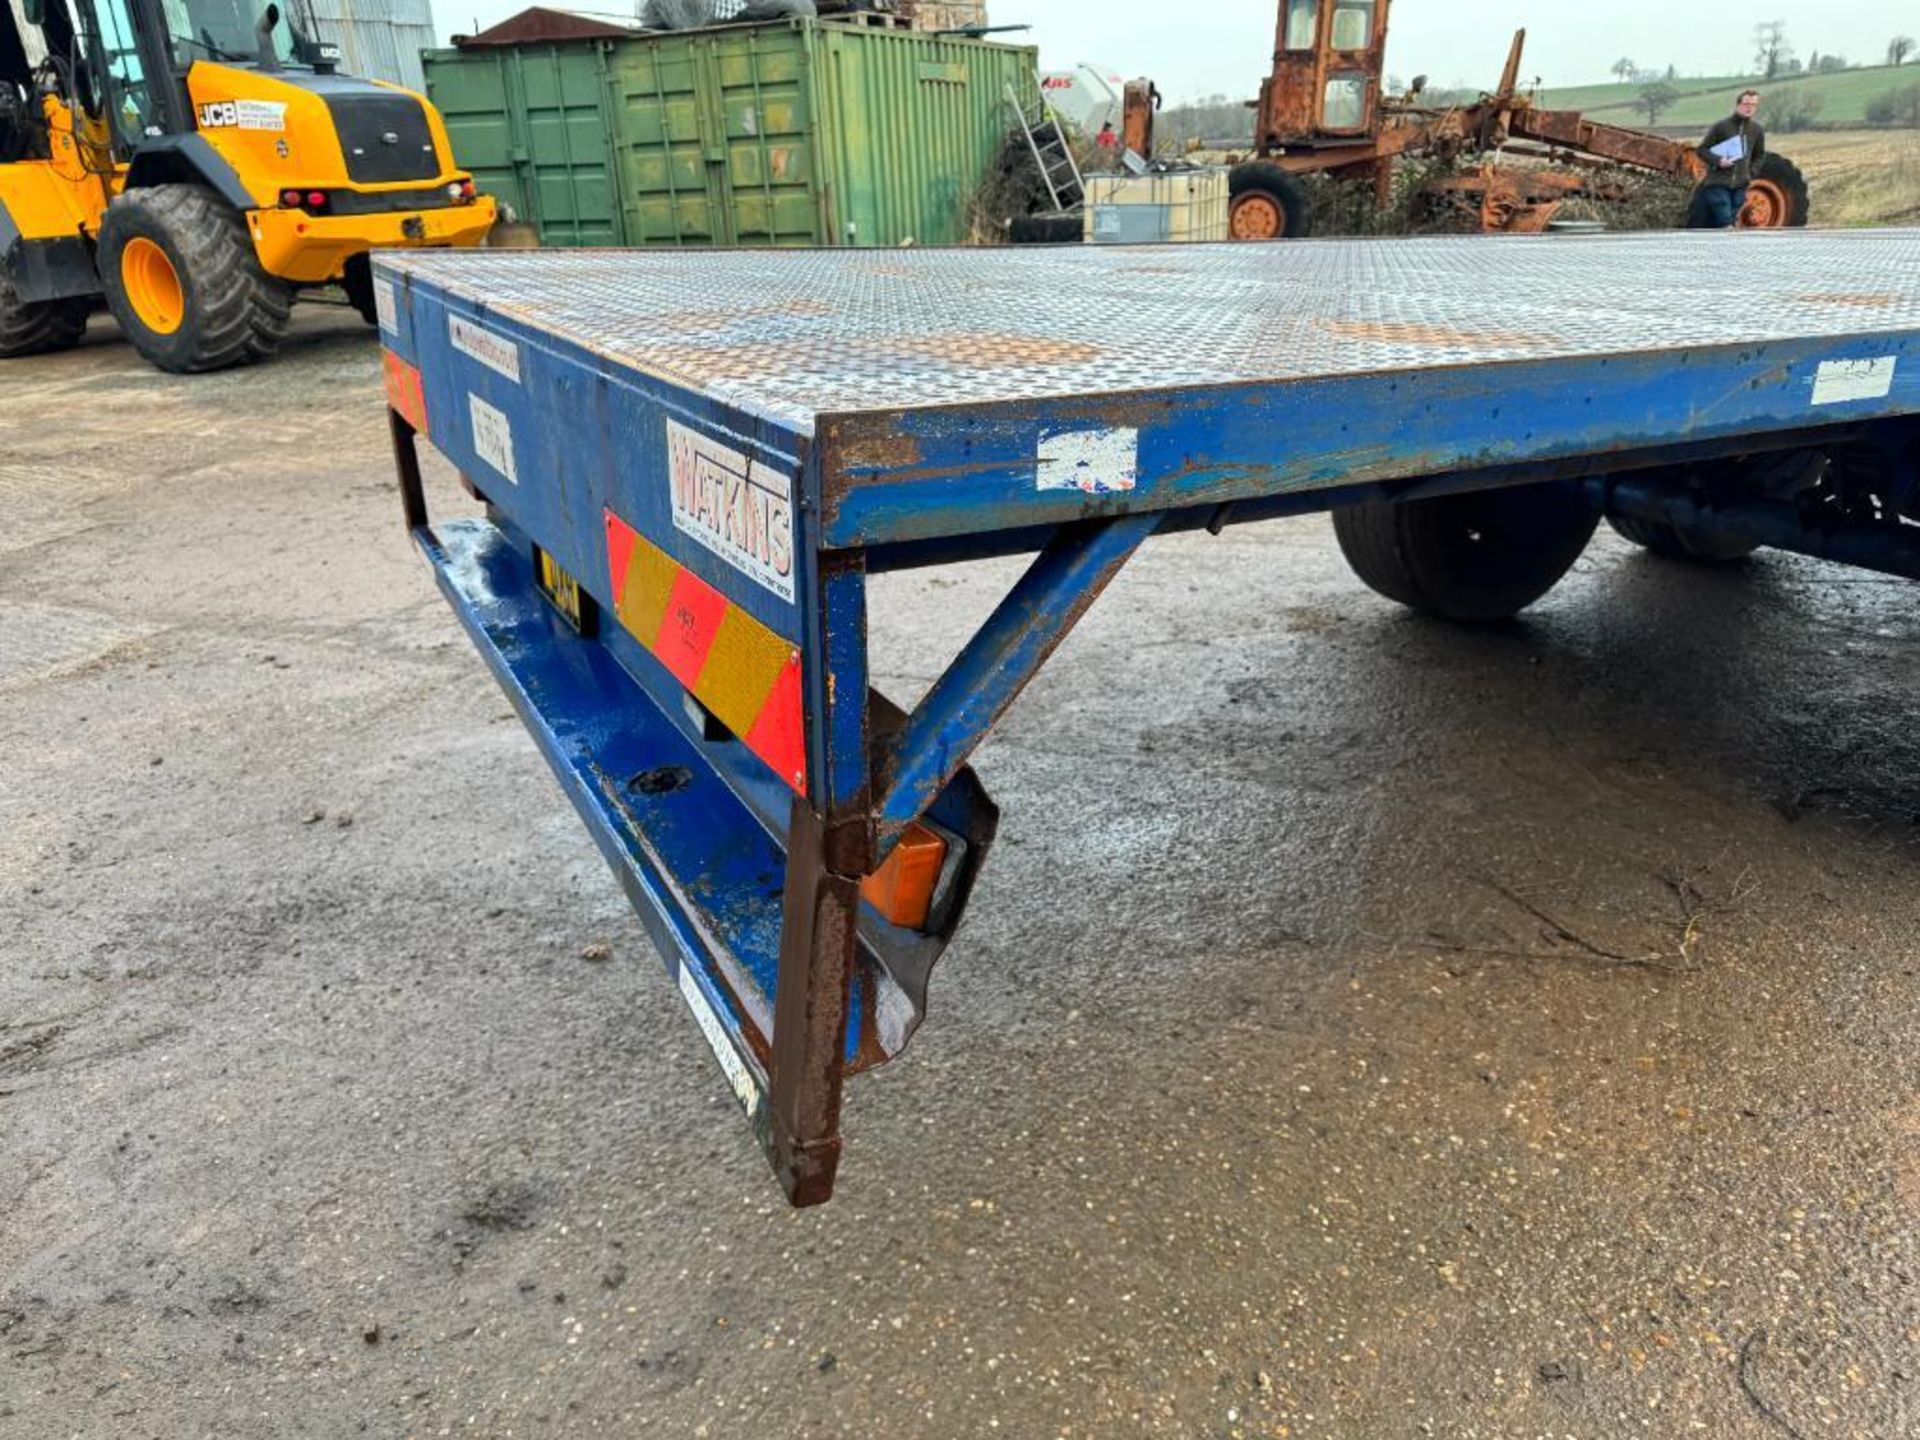 Philip Watkins 32ft twin axle flat bed trailer with metal floor, front bale rave, sprung drawbar and - Image 3 of 11